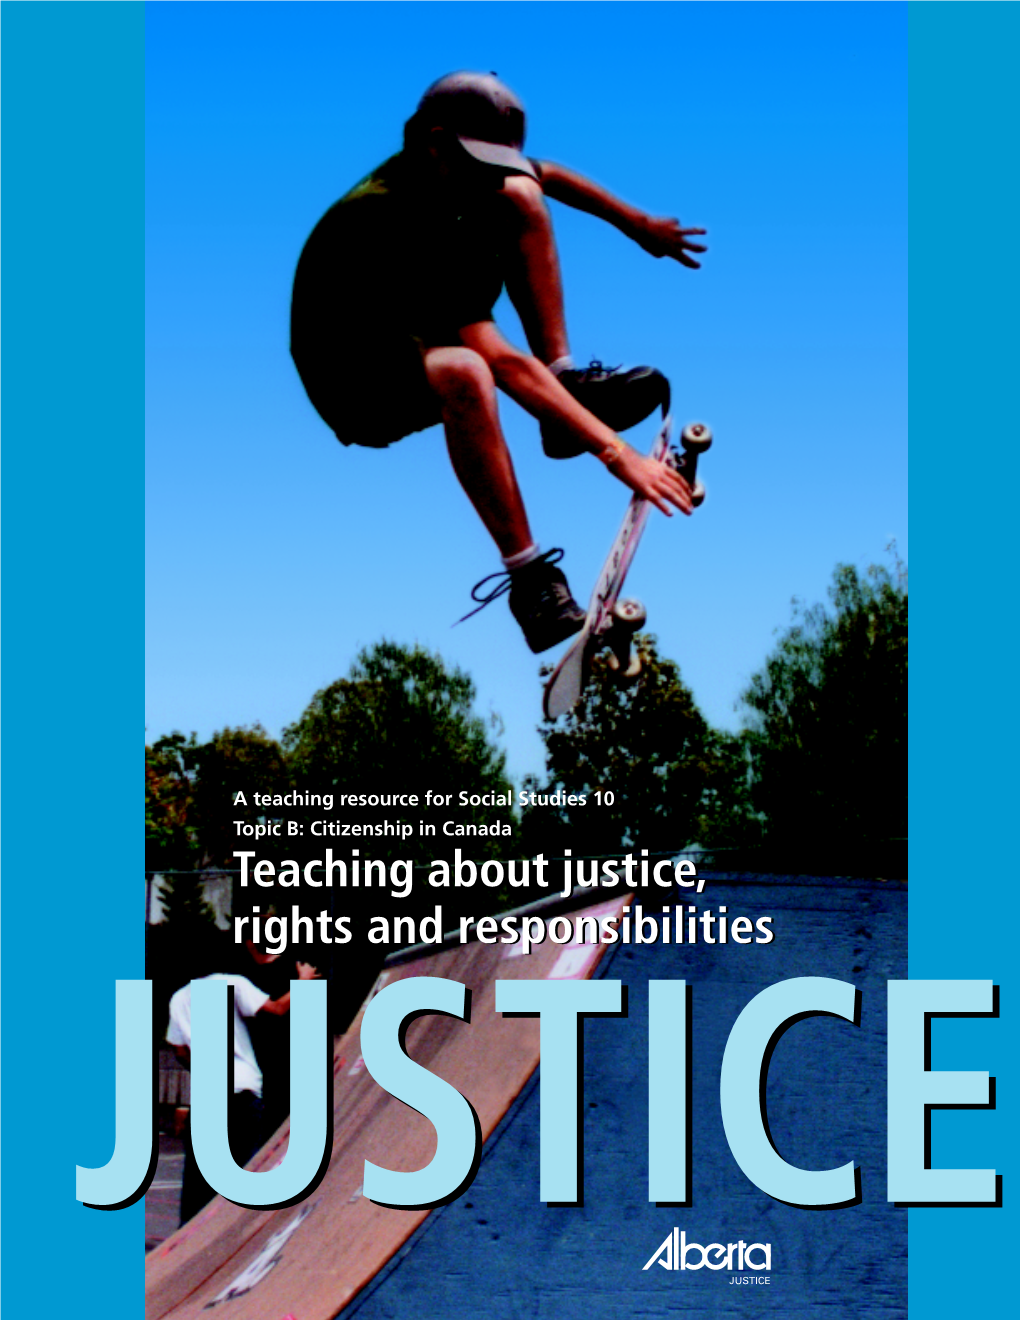 Teaching About Justice, Rights and Responsibilities